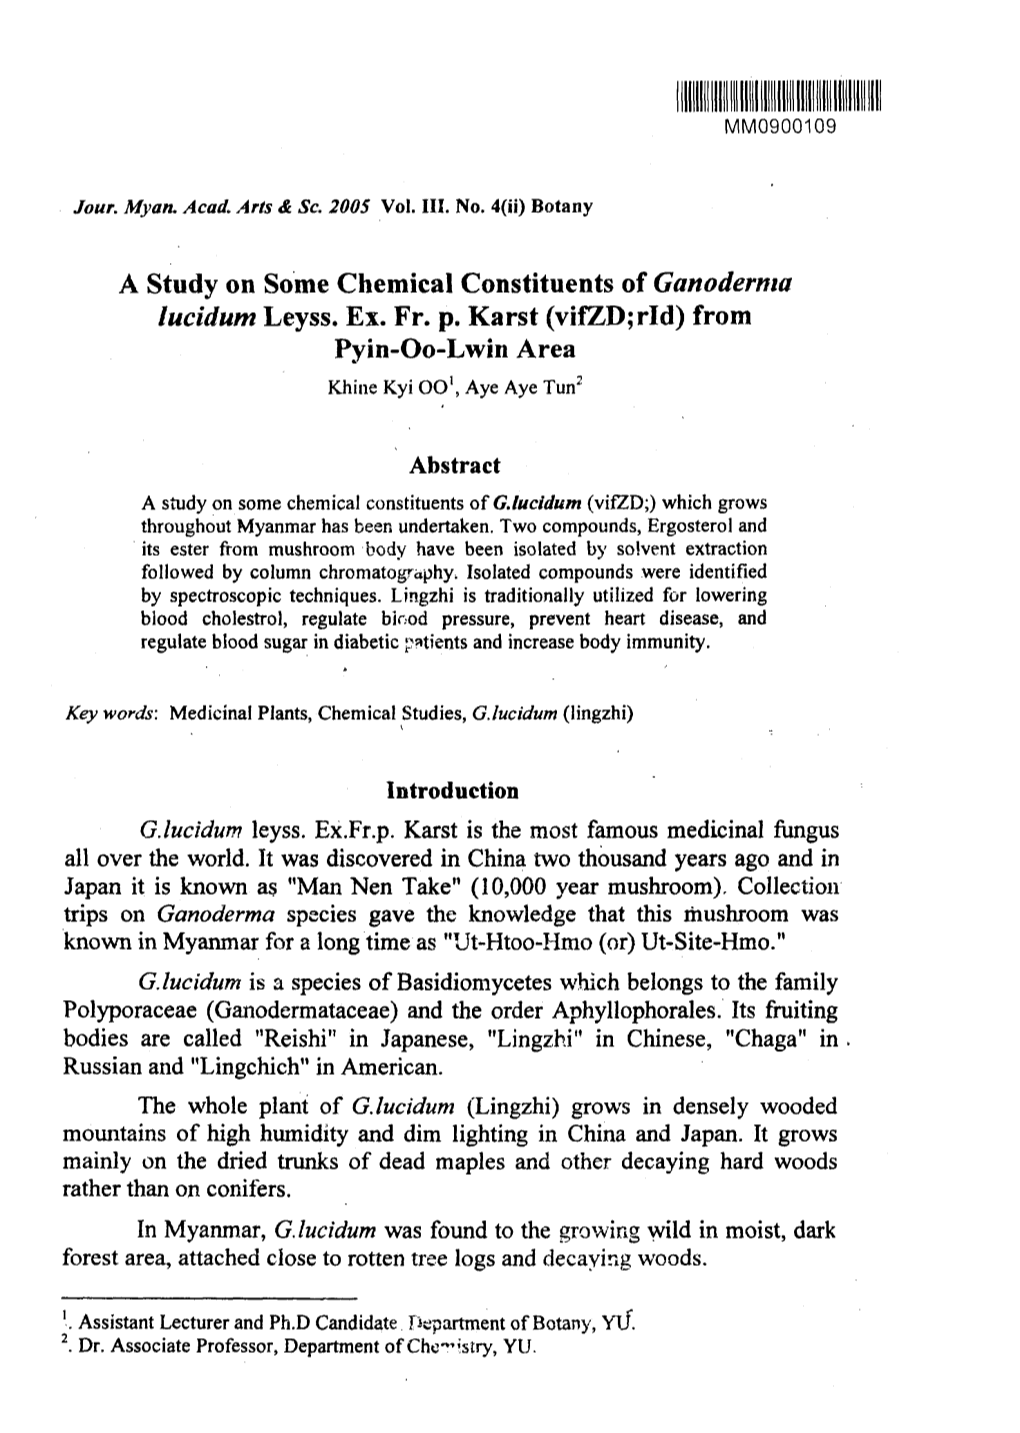 A Study on Some Chemical Constituents of Ganoderma Lucidum Leyss